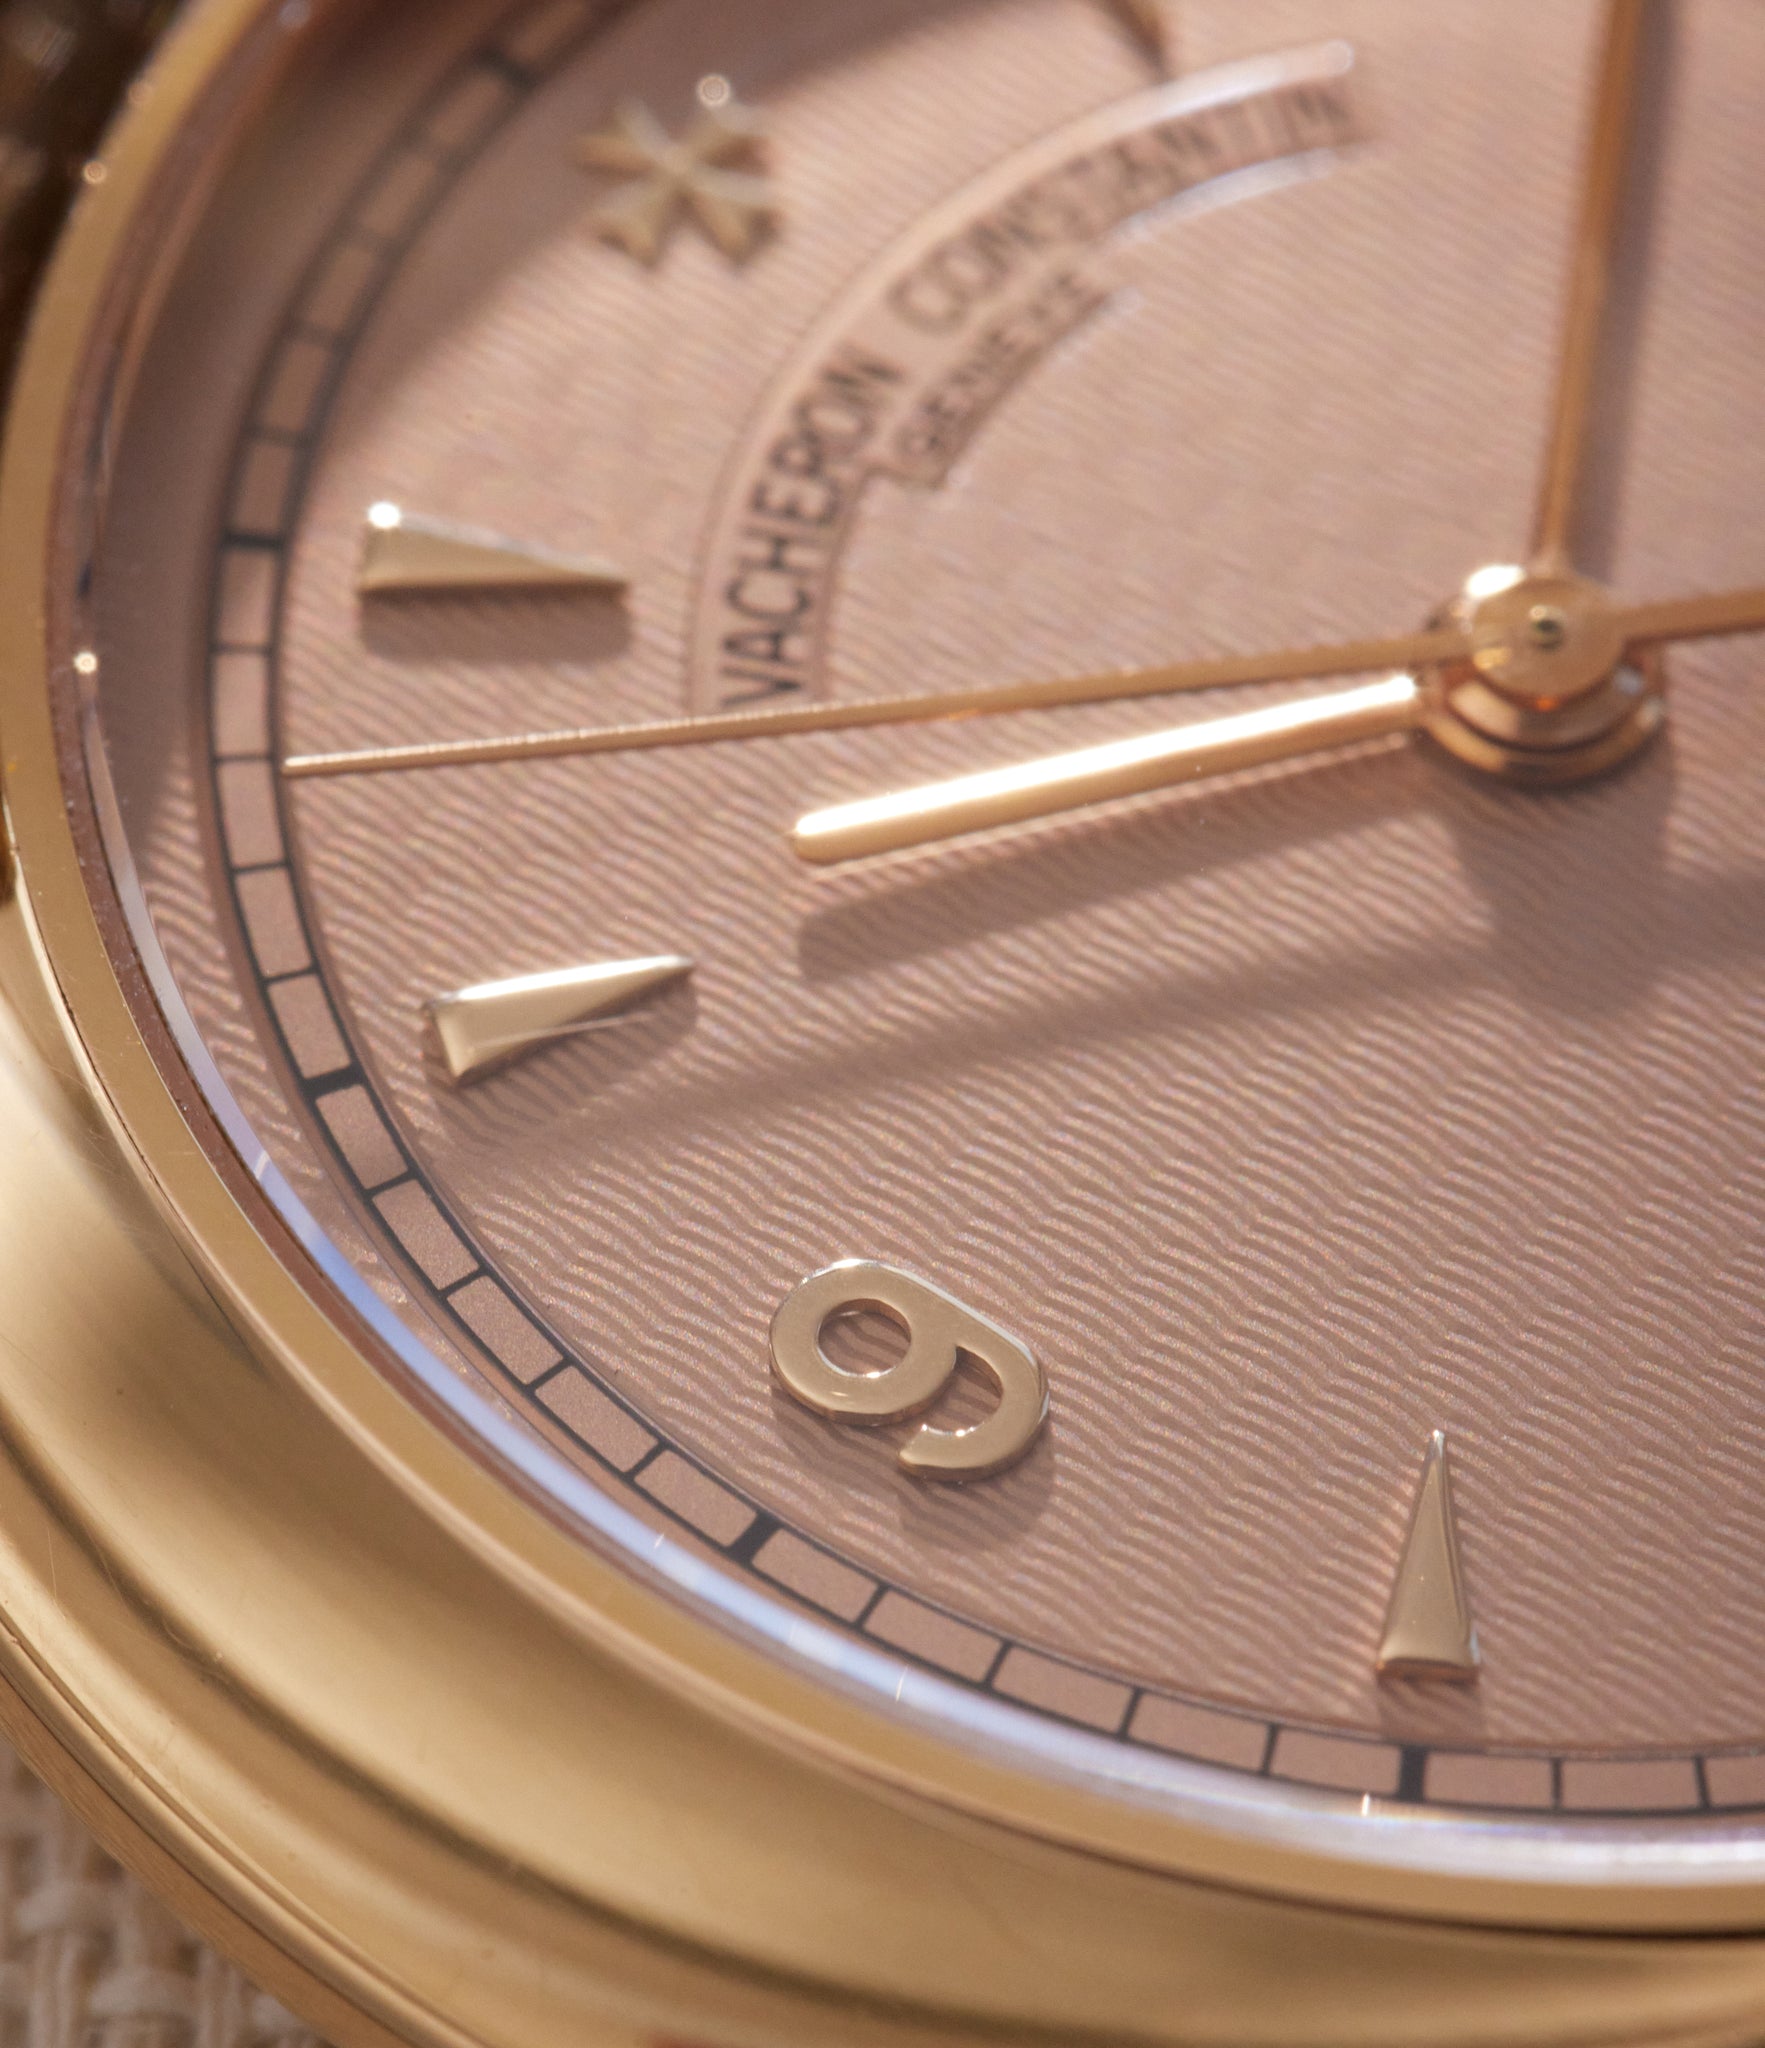 Vacheron Constantin Les Historiques reference 48003 | Rose Gold | limited edition release of 25 pieces | A Collected Man | Available Worldwide